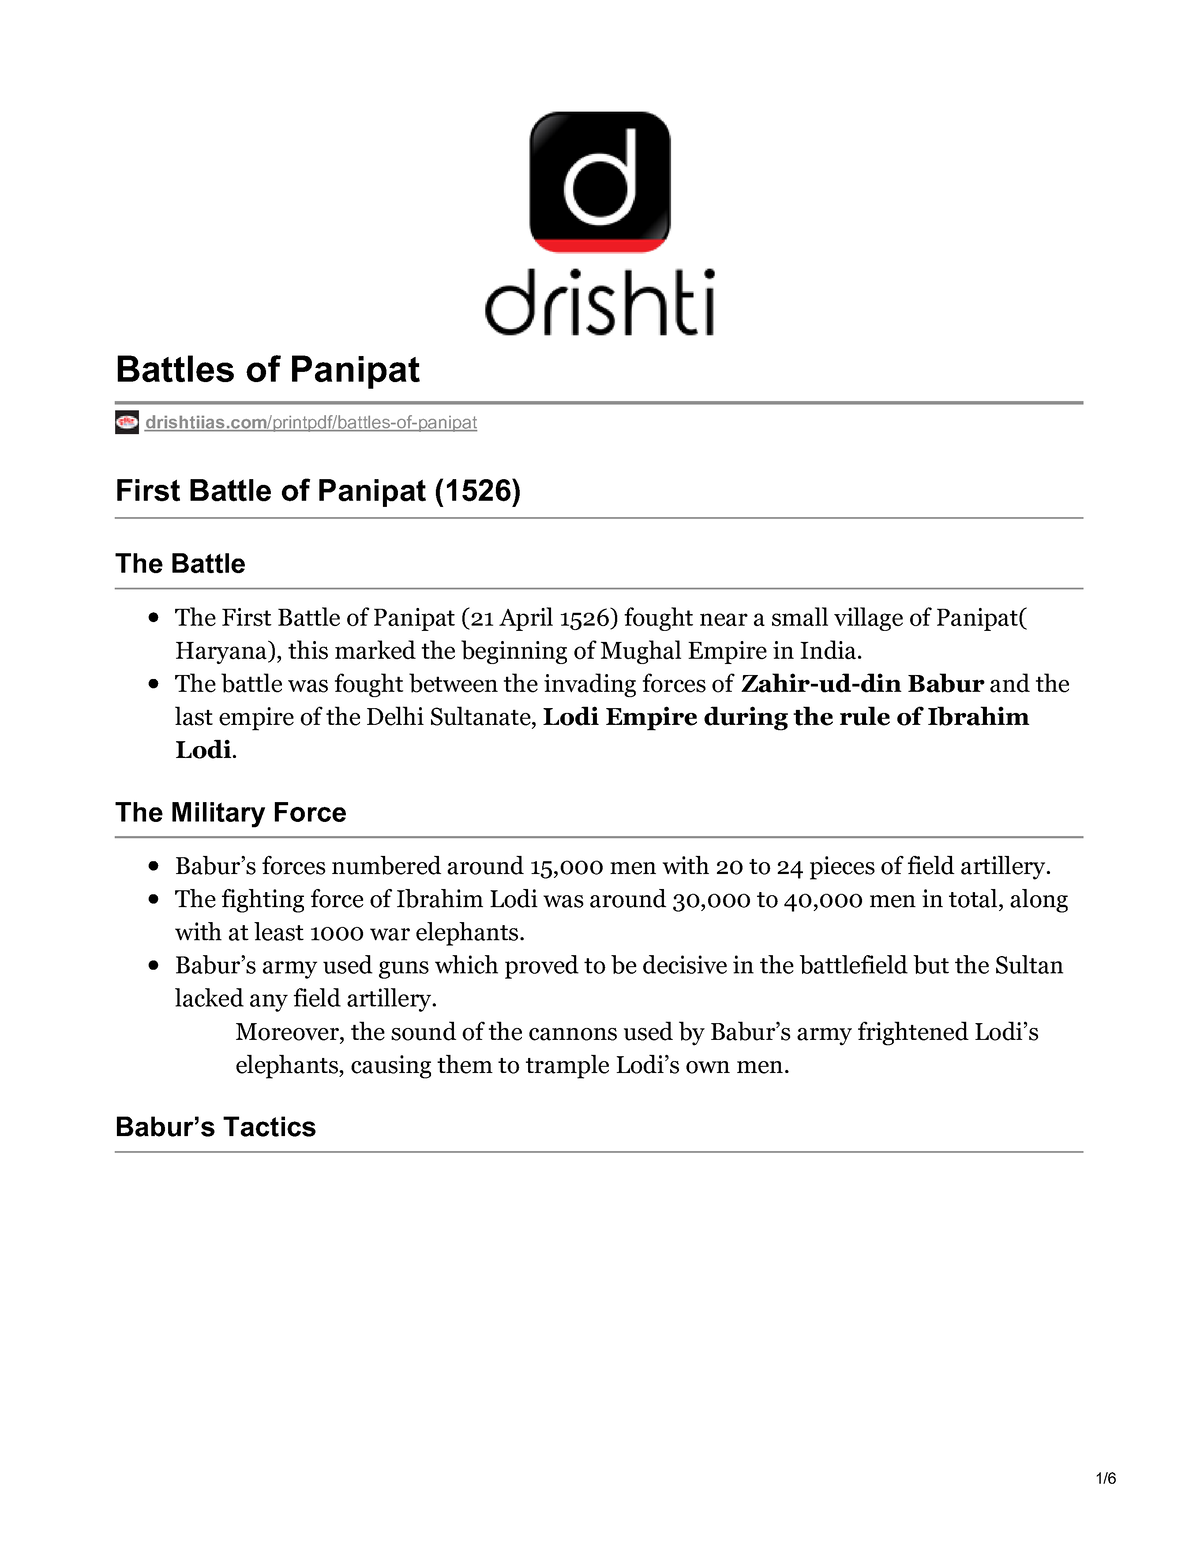 essay on first battle of panipat